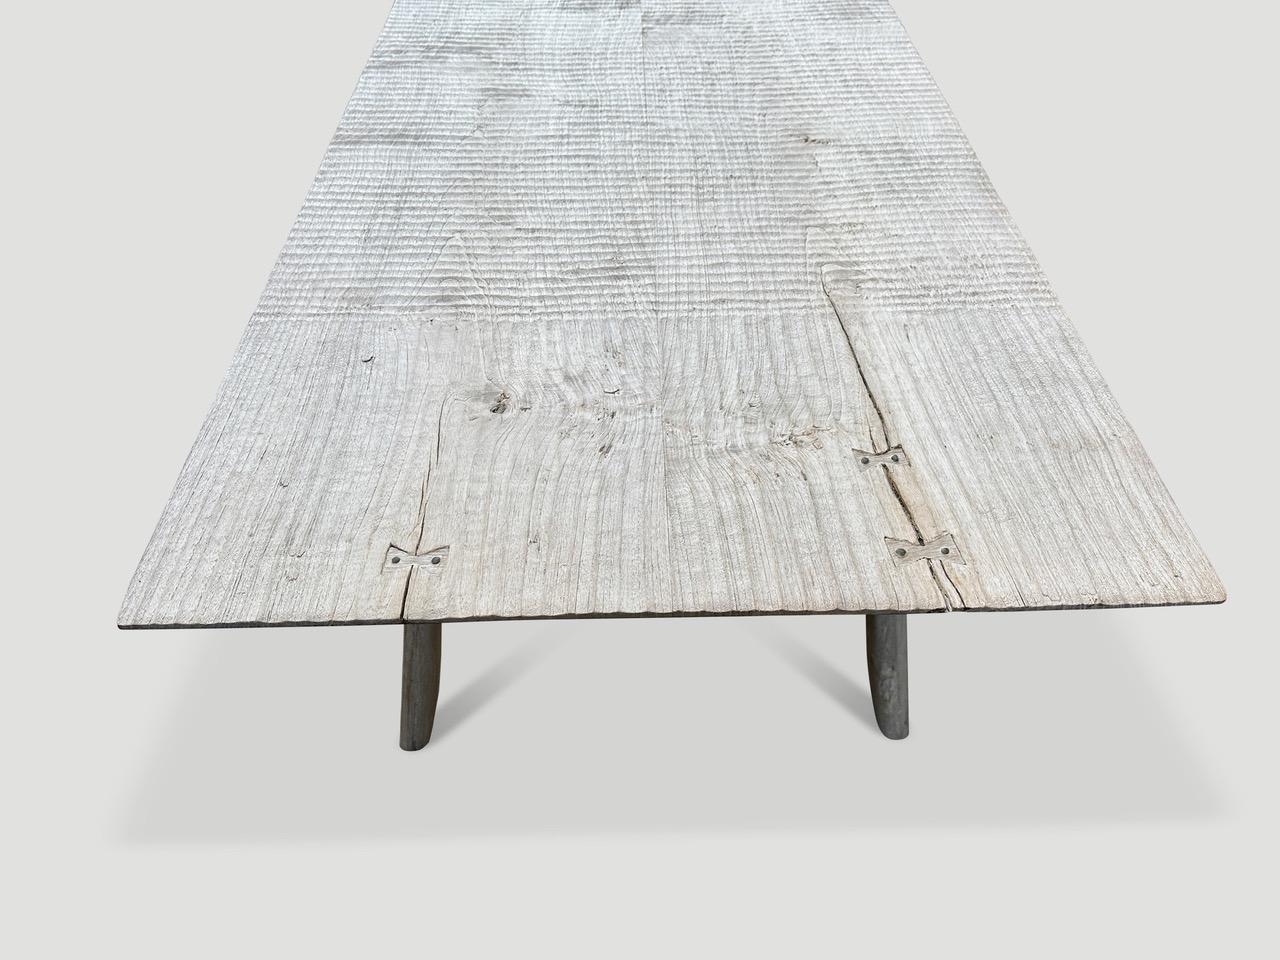 Andrianna Shamaris St. Barts Couture Teak Wood Dining Table For Sale 1